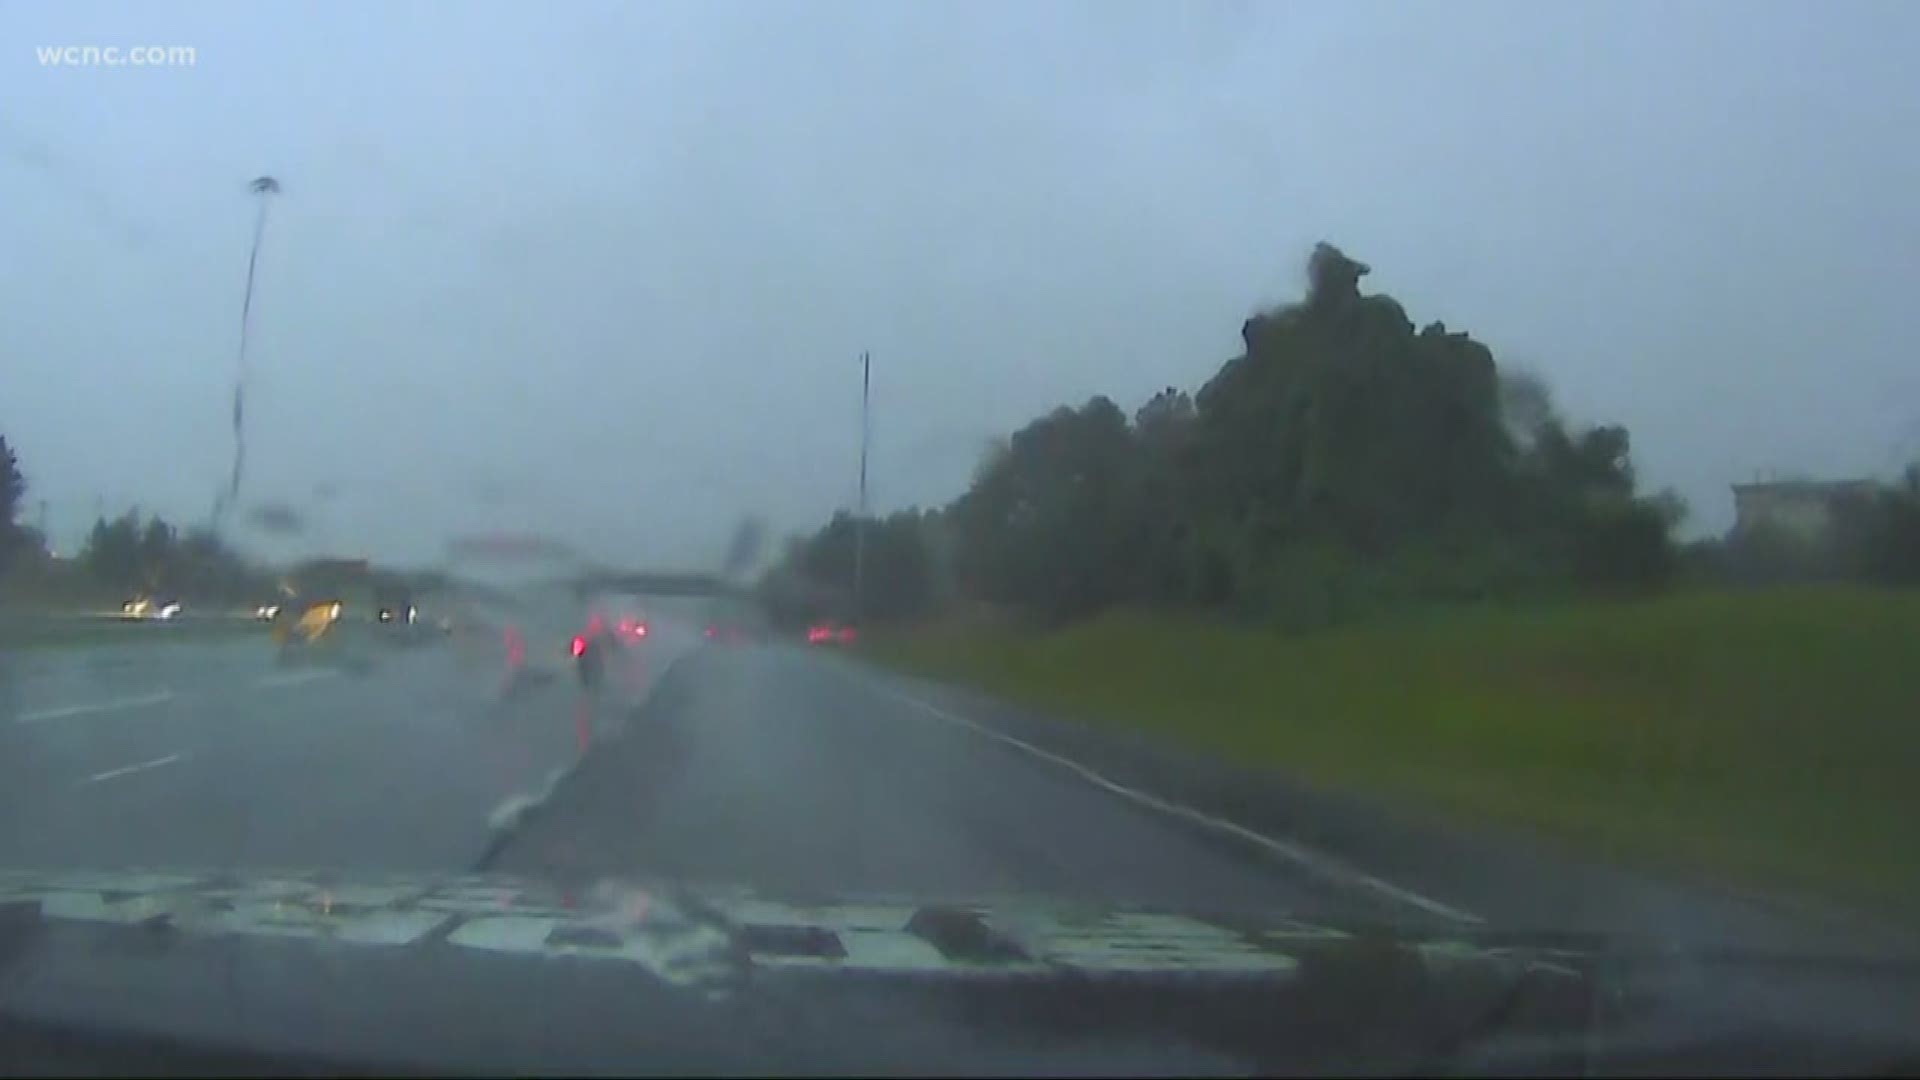 Our crew in the Chevy Storm Tracker saw significant ponding on I-77.